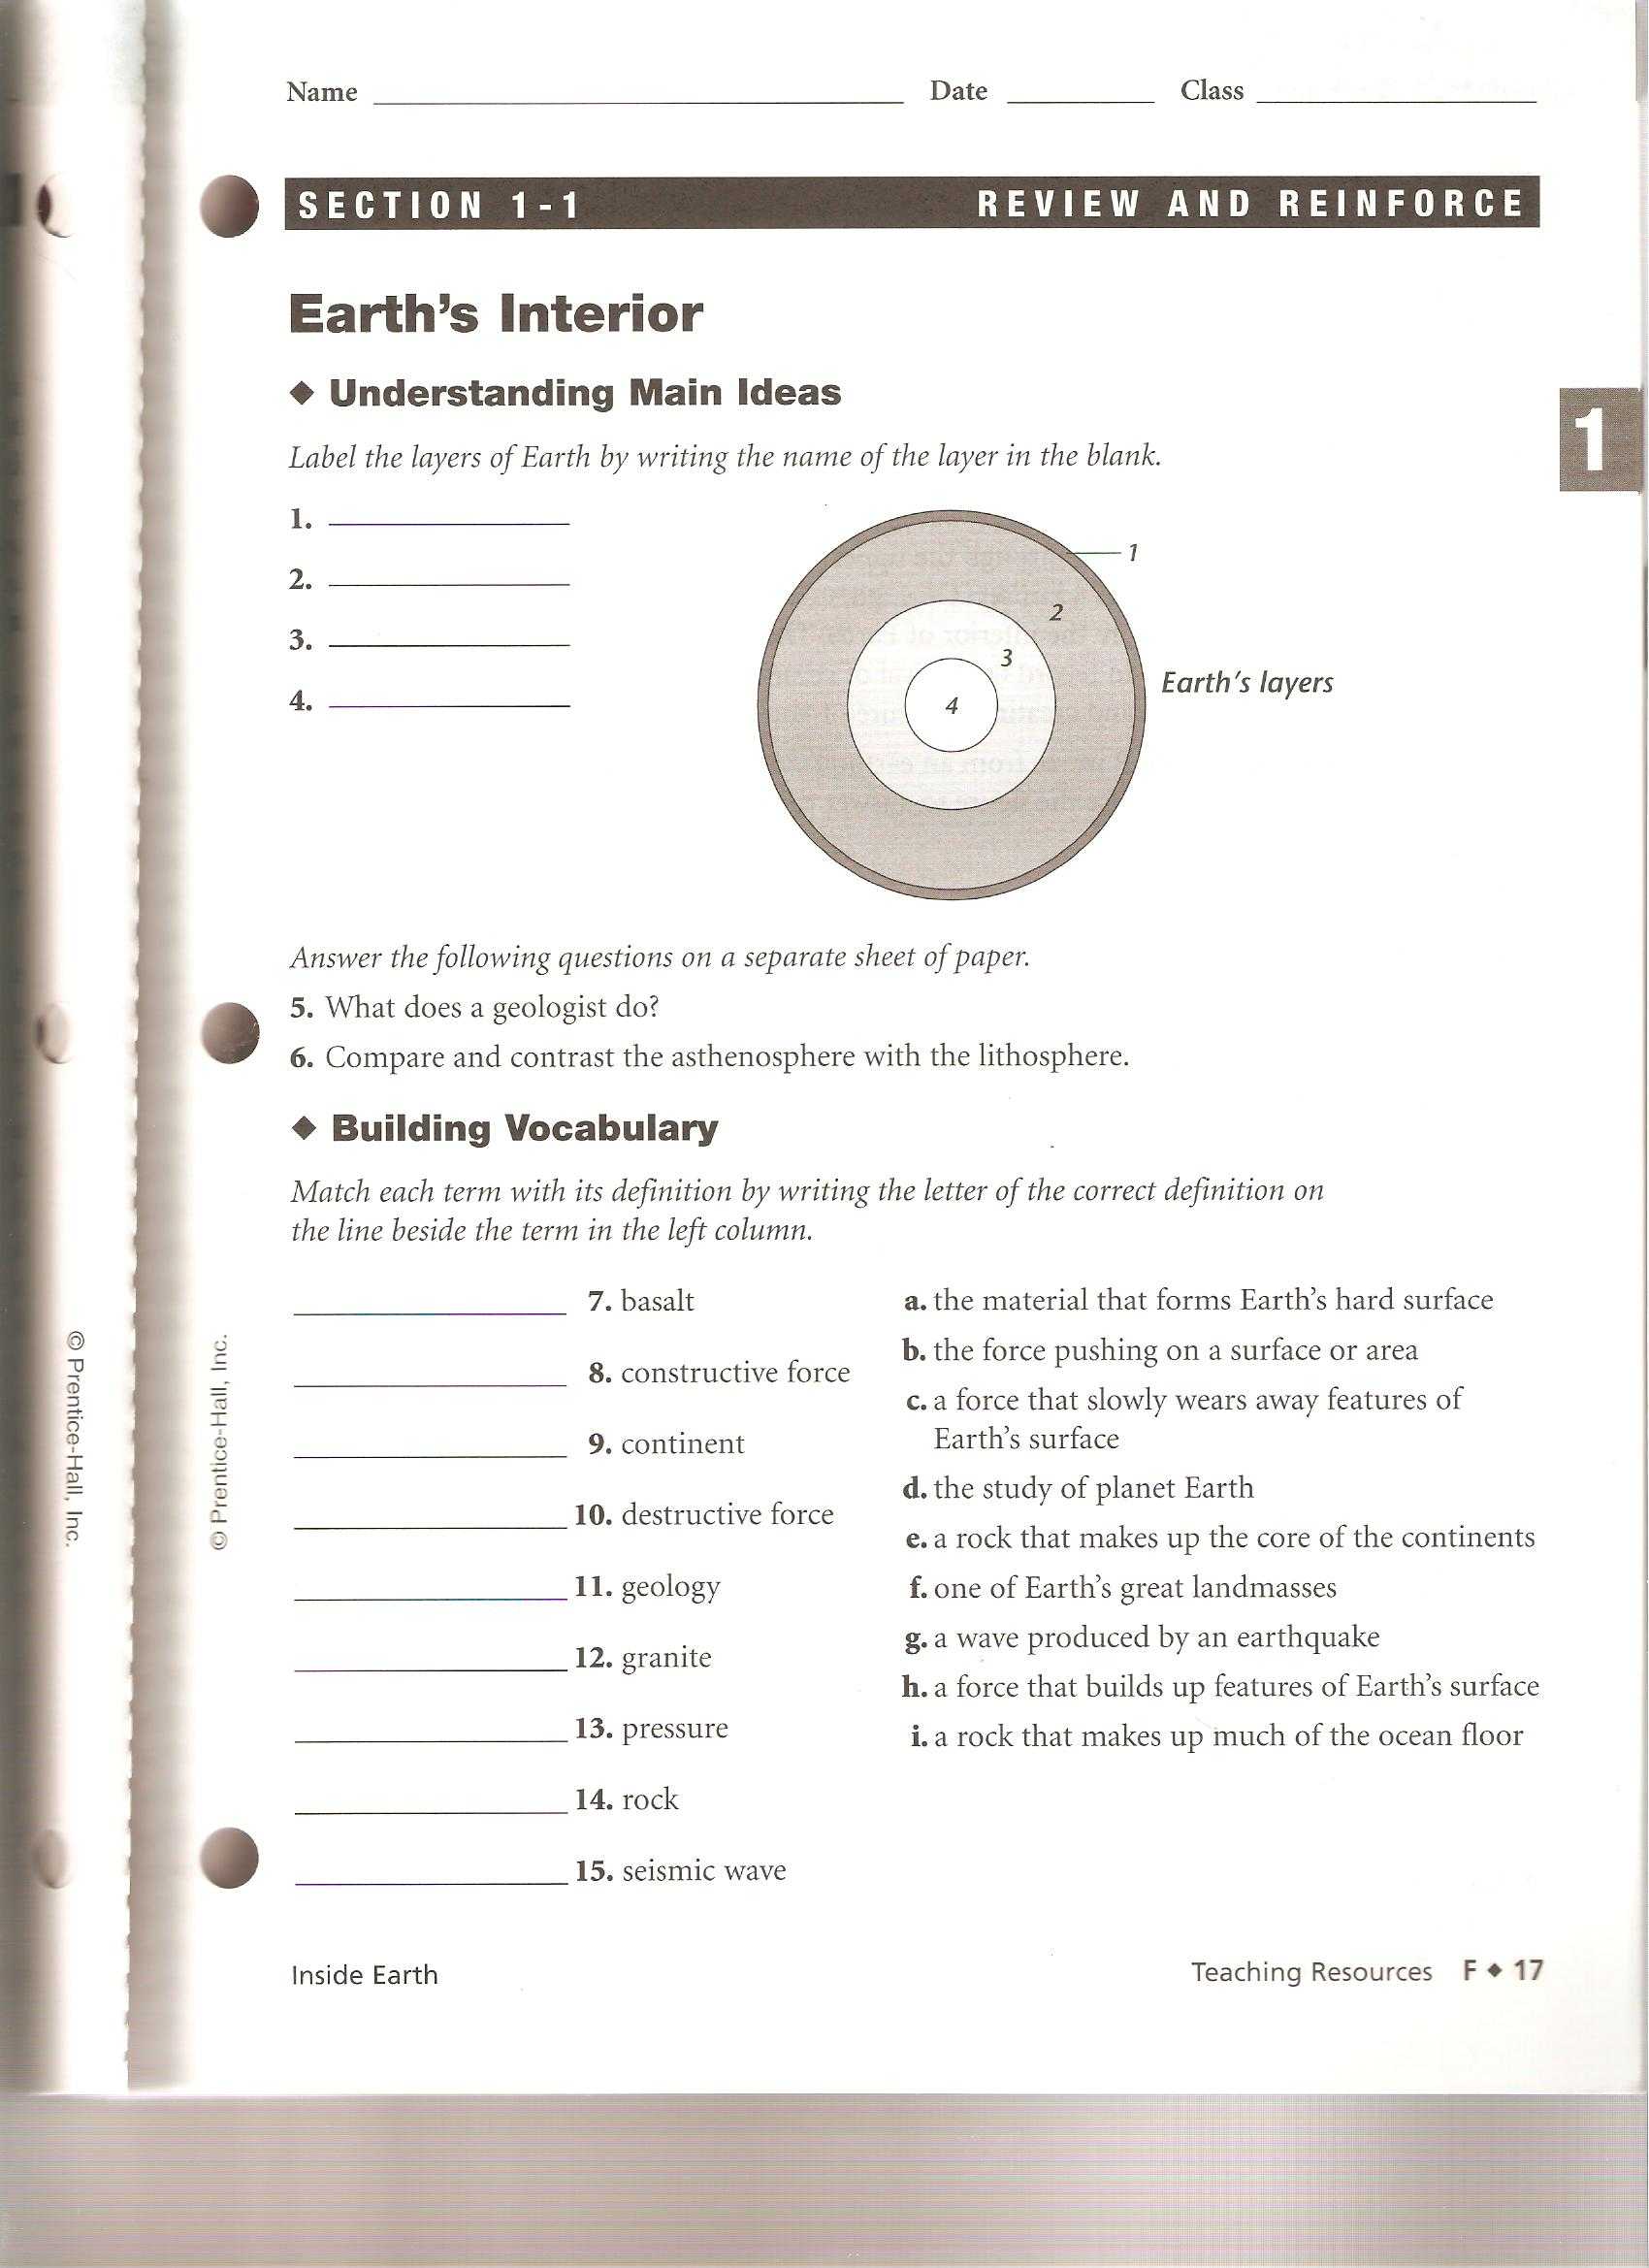 Skills Worksheet Concept Review Answers with Earth In Space Worksheet Answers the Best Worksheets Image